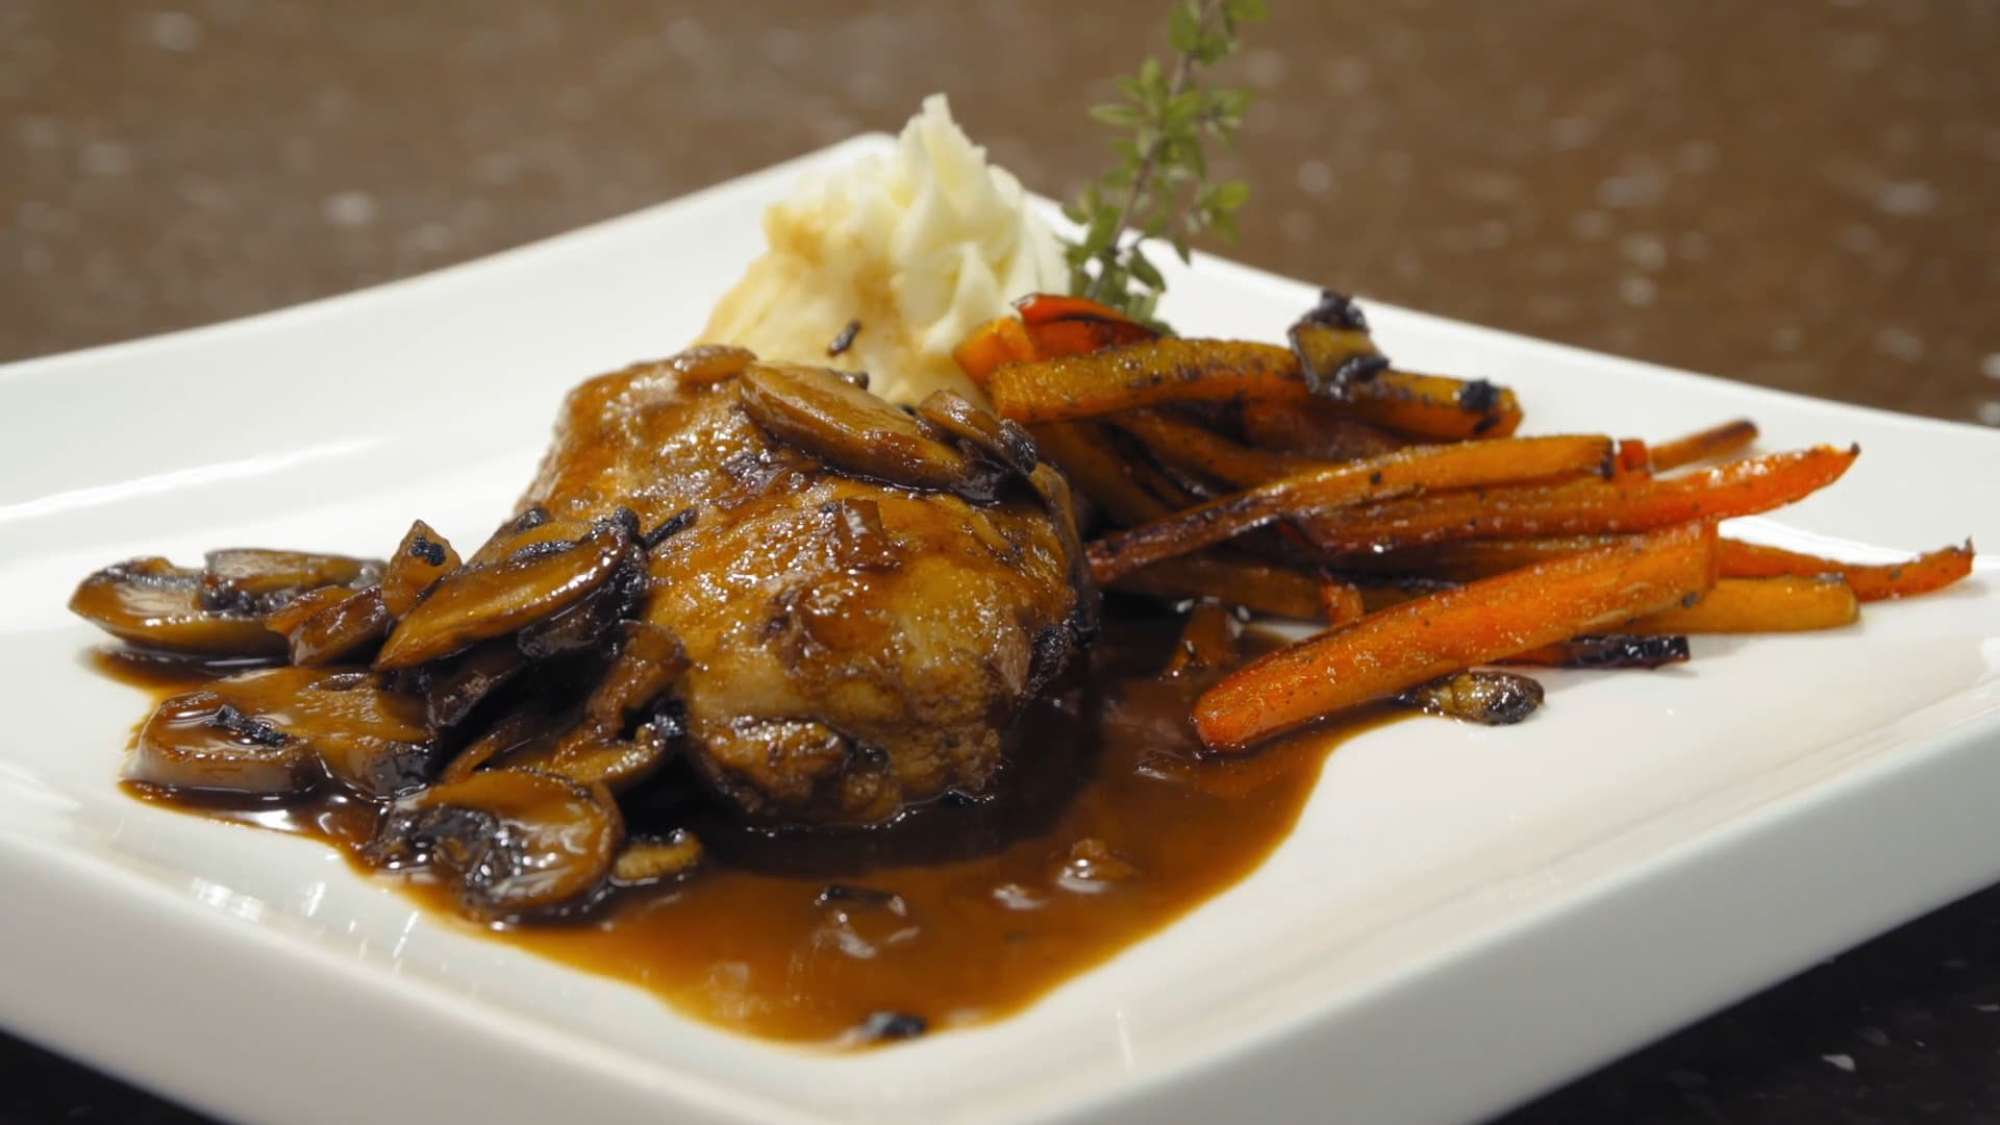 A finely arranged plate with chicken in a mushroom sauce, roasted carrots, and mashed potatoes.